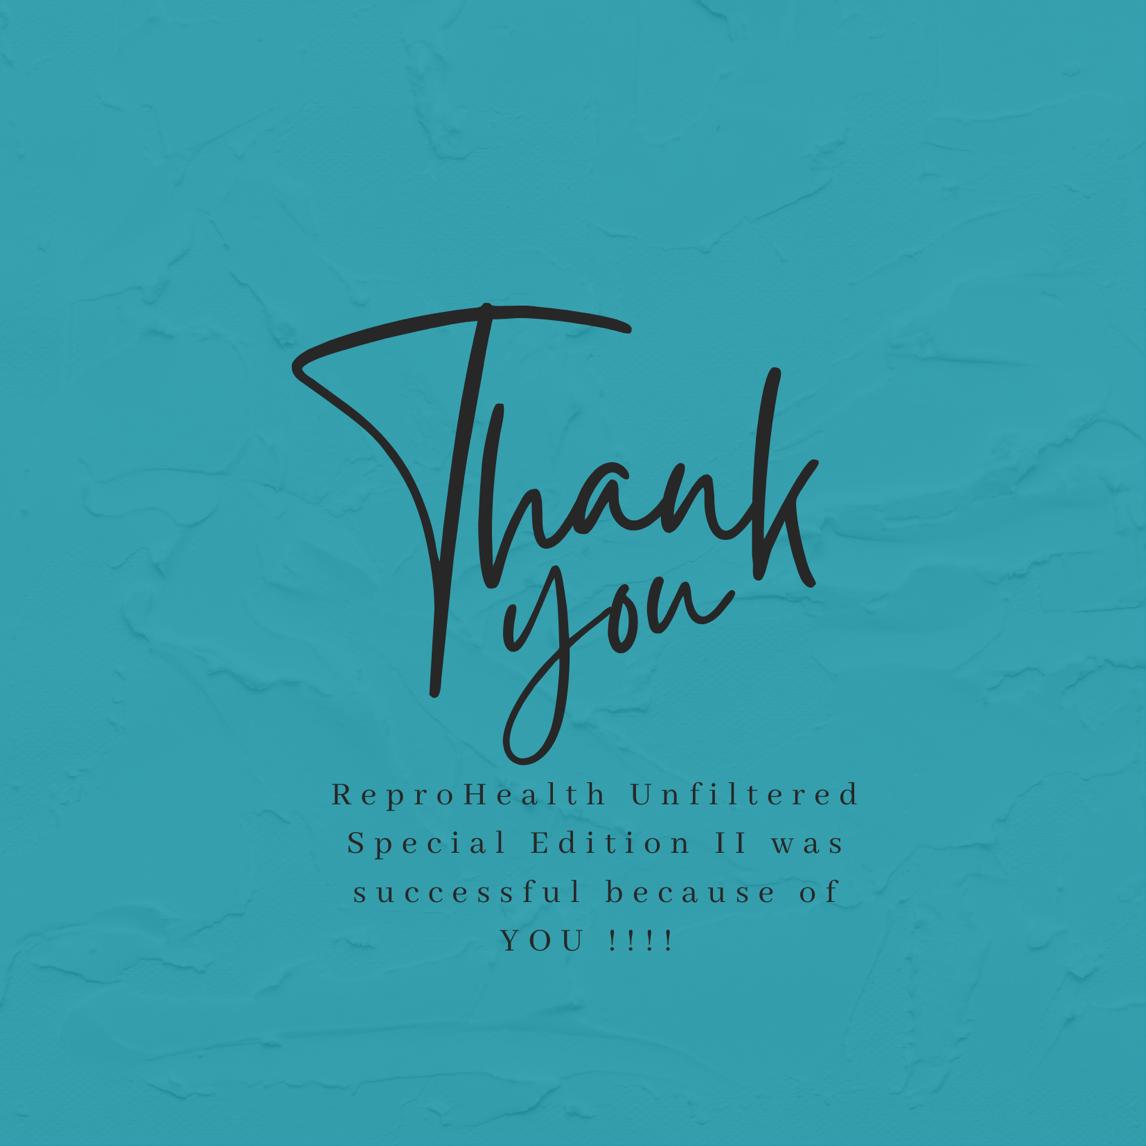 I want to express my deepest gratitude to each of you for making our webinar a resounding success. Together, you made it an enriching experience for everyone involved. With heartfelt appreciation, Naadu Awuradwoa Addico, MPH